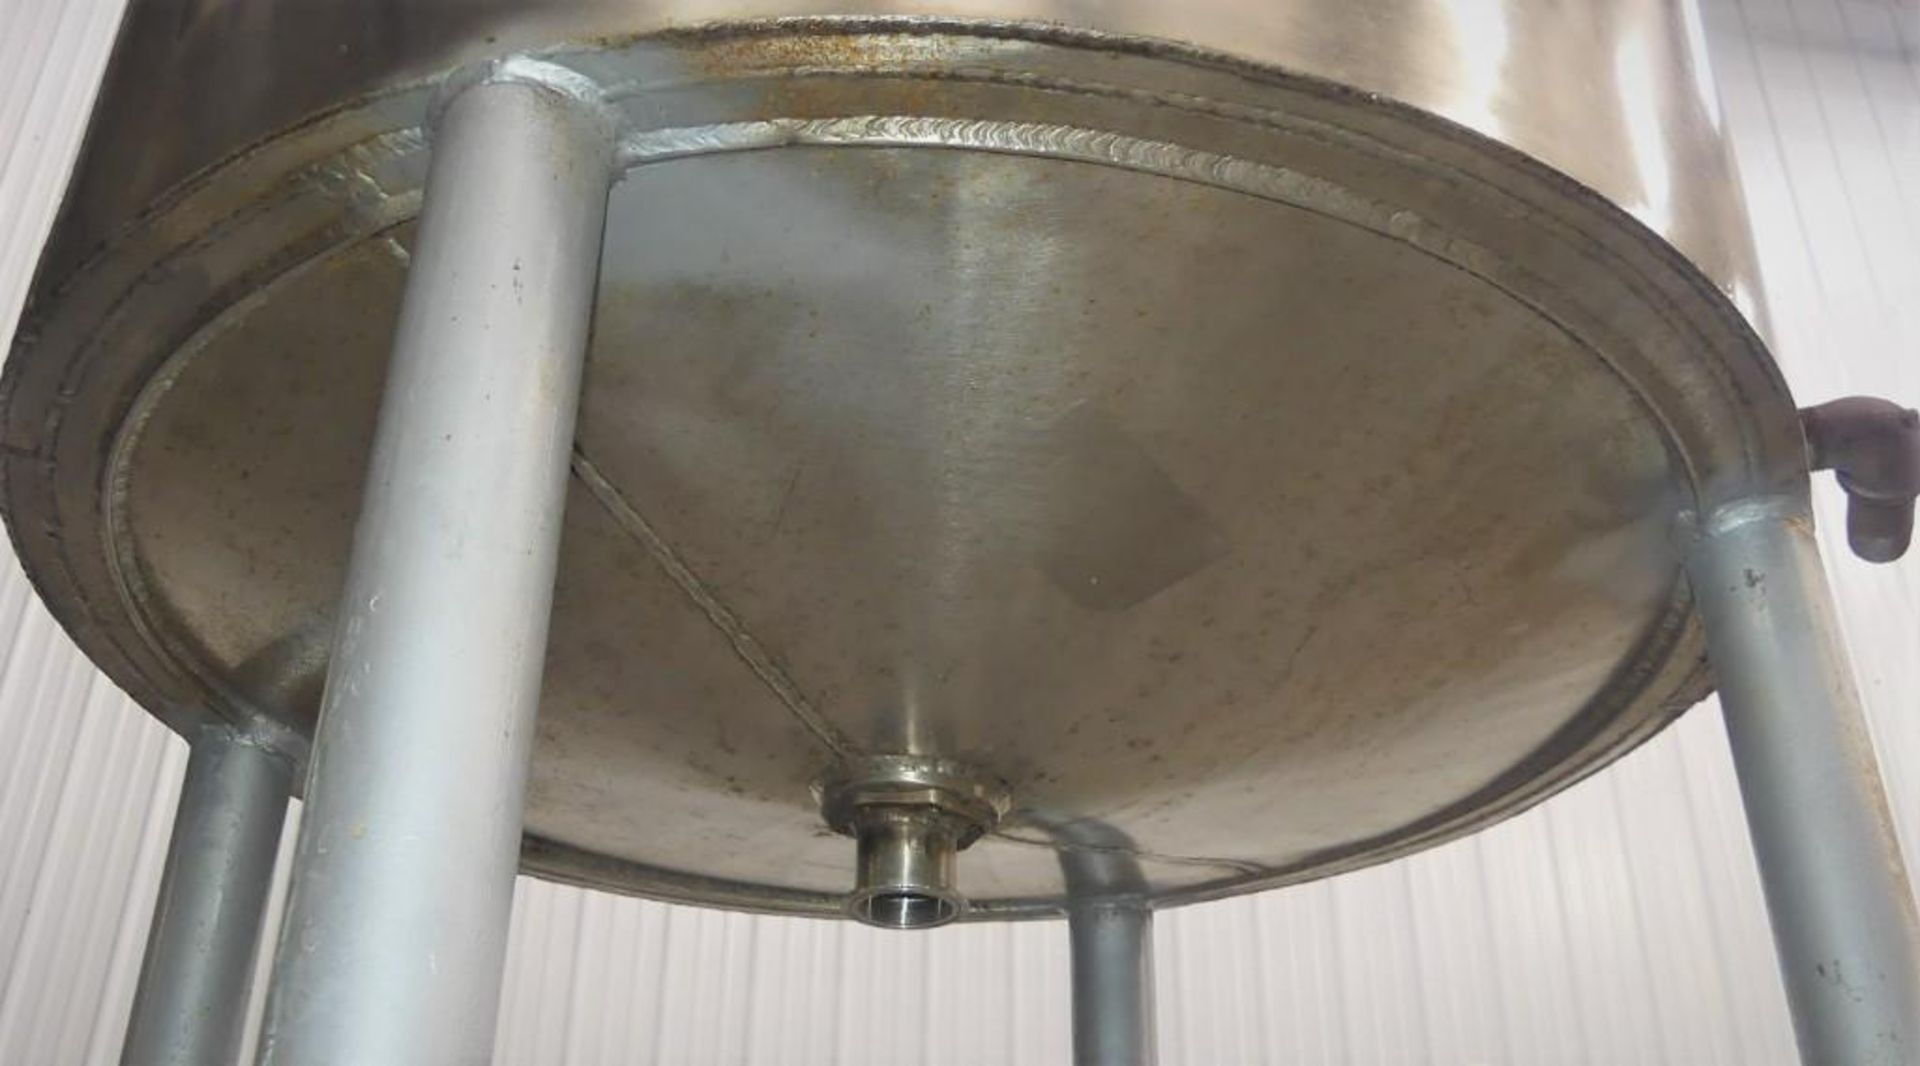 B&G Machine Company 100 Gallon Stainless Steel Jacketed Mixing Tank - Image 5 of 12